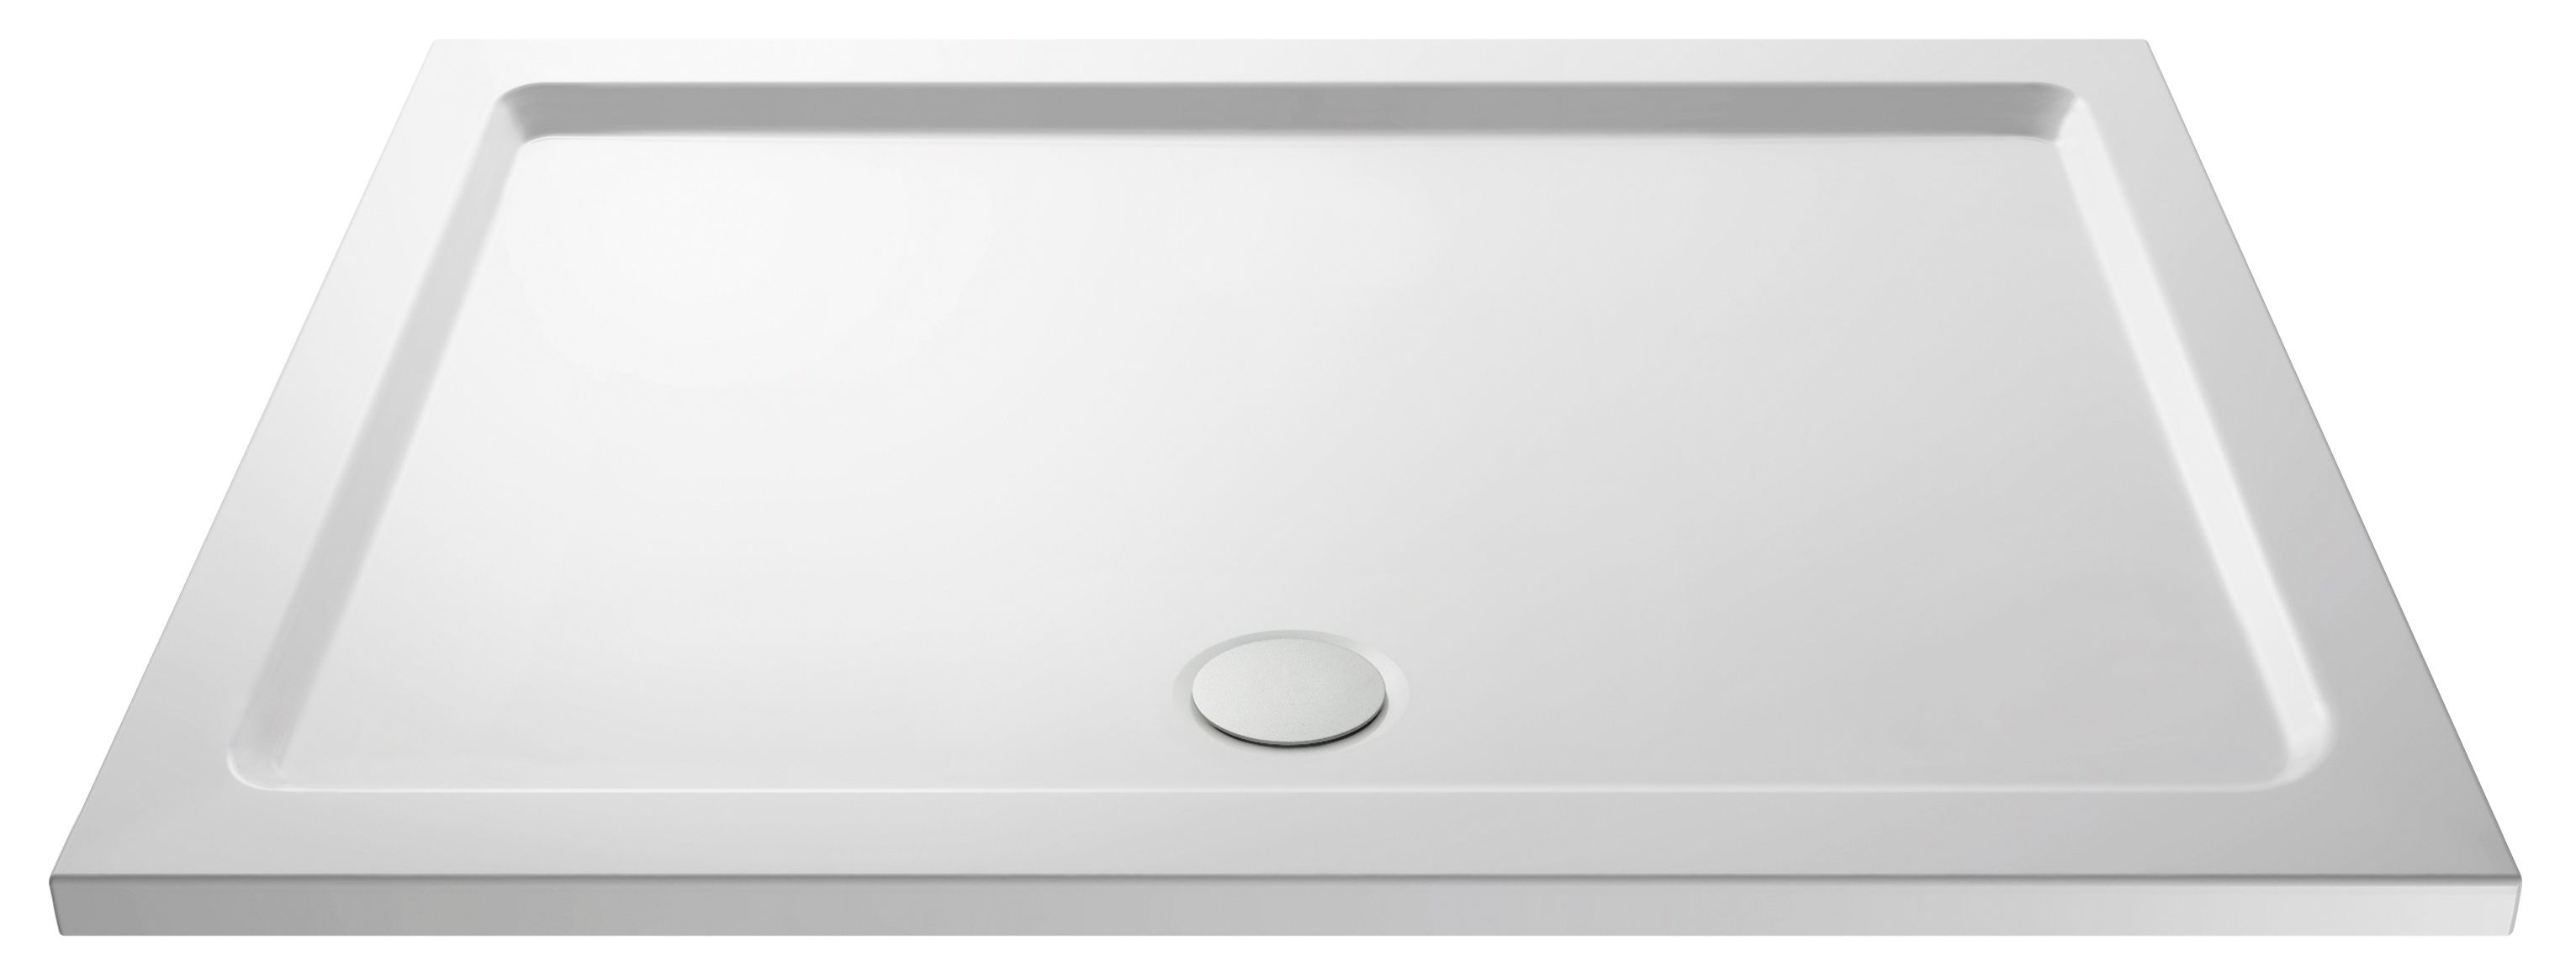 Nuie Shower Tray Pearlstone Rectangular1400mm x 760mm - White - NTP032 